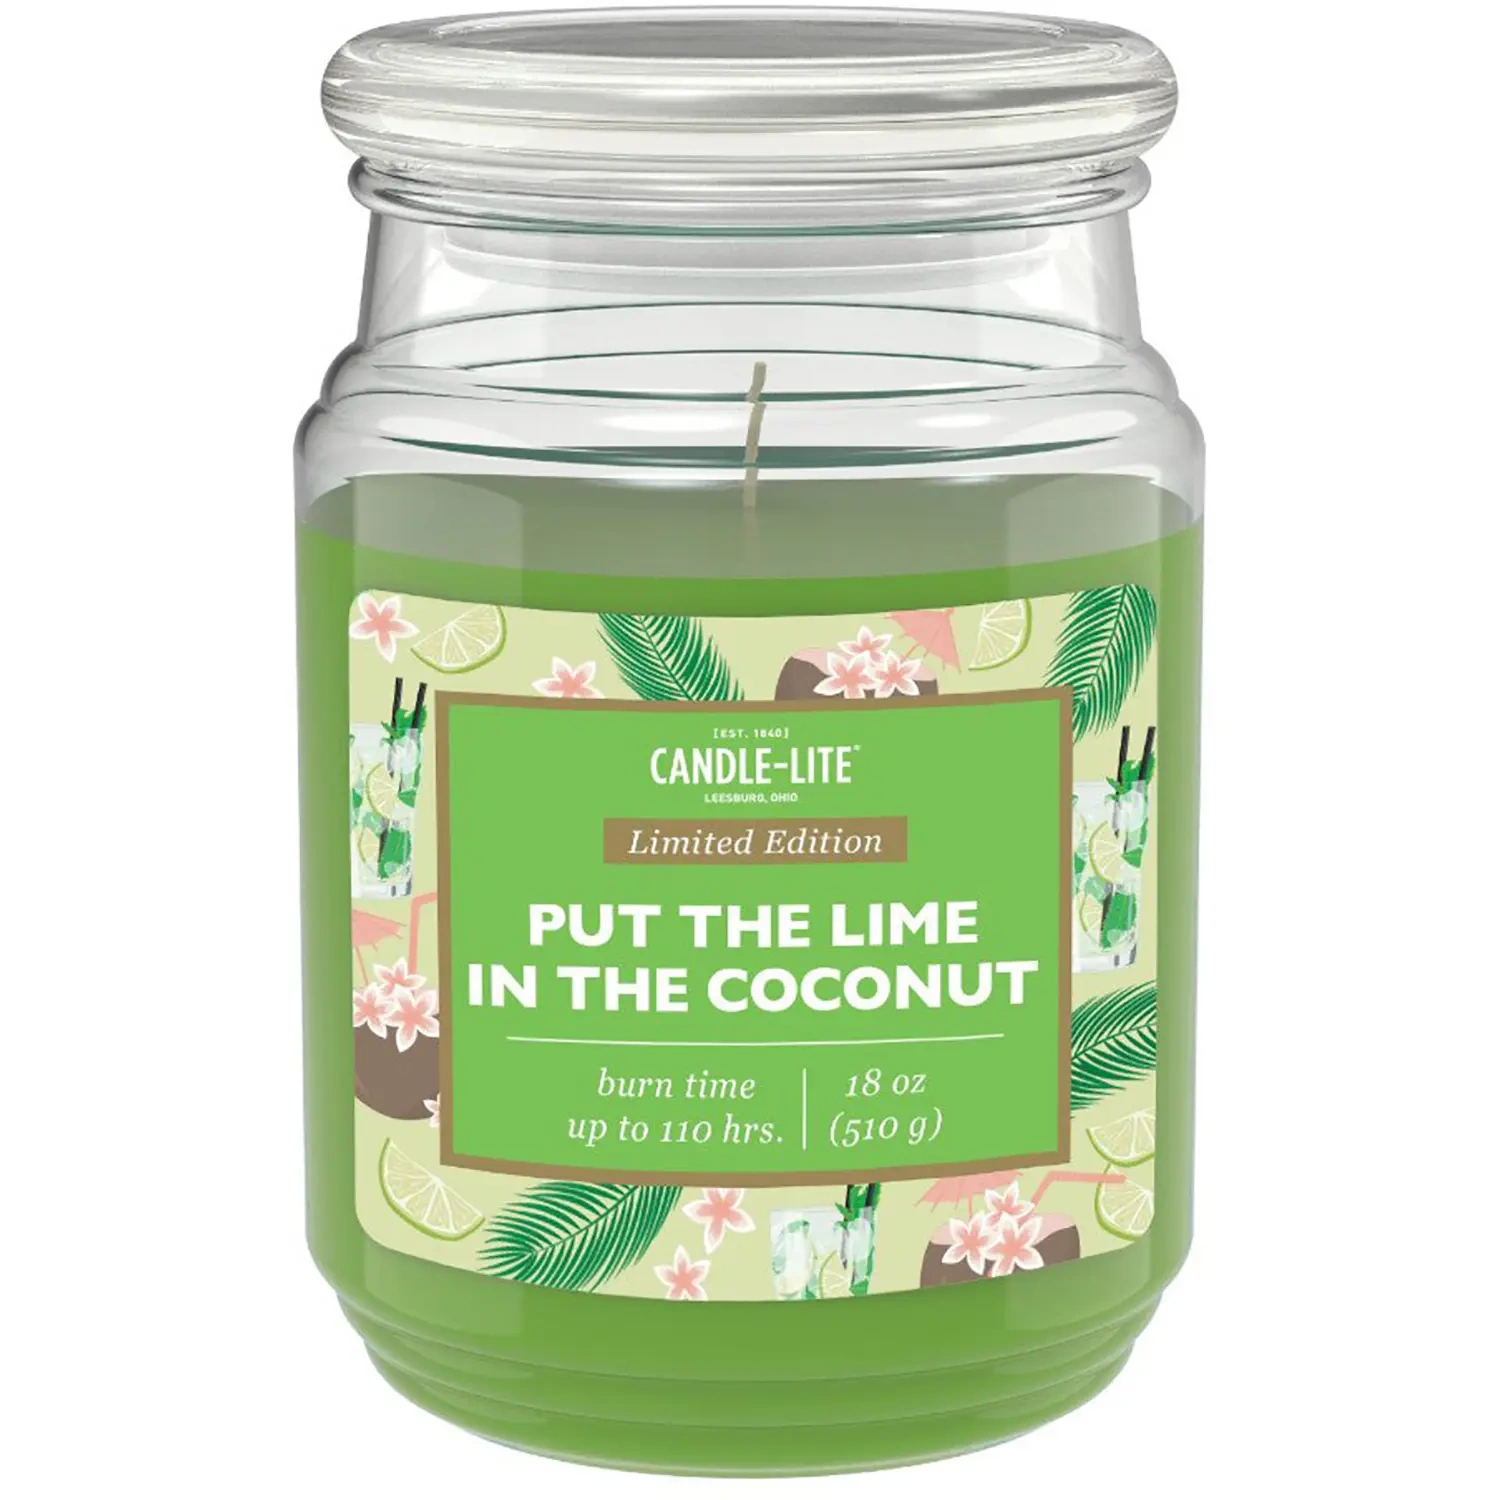 Put The Lime In The Coconut Candela da Candle-lite